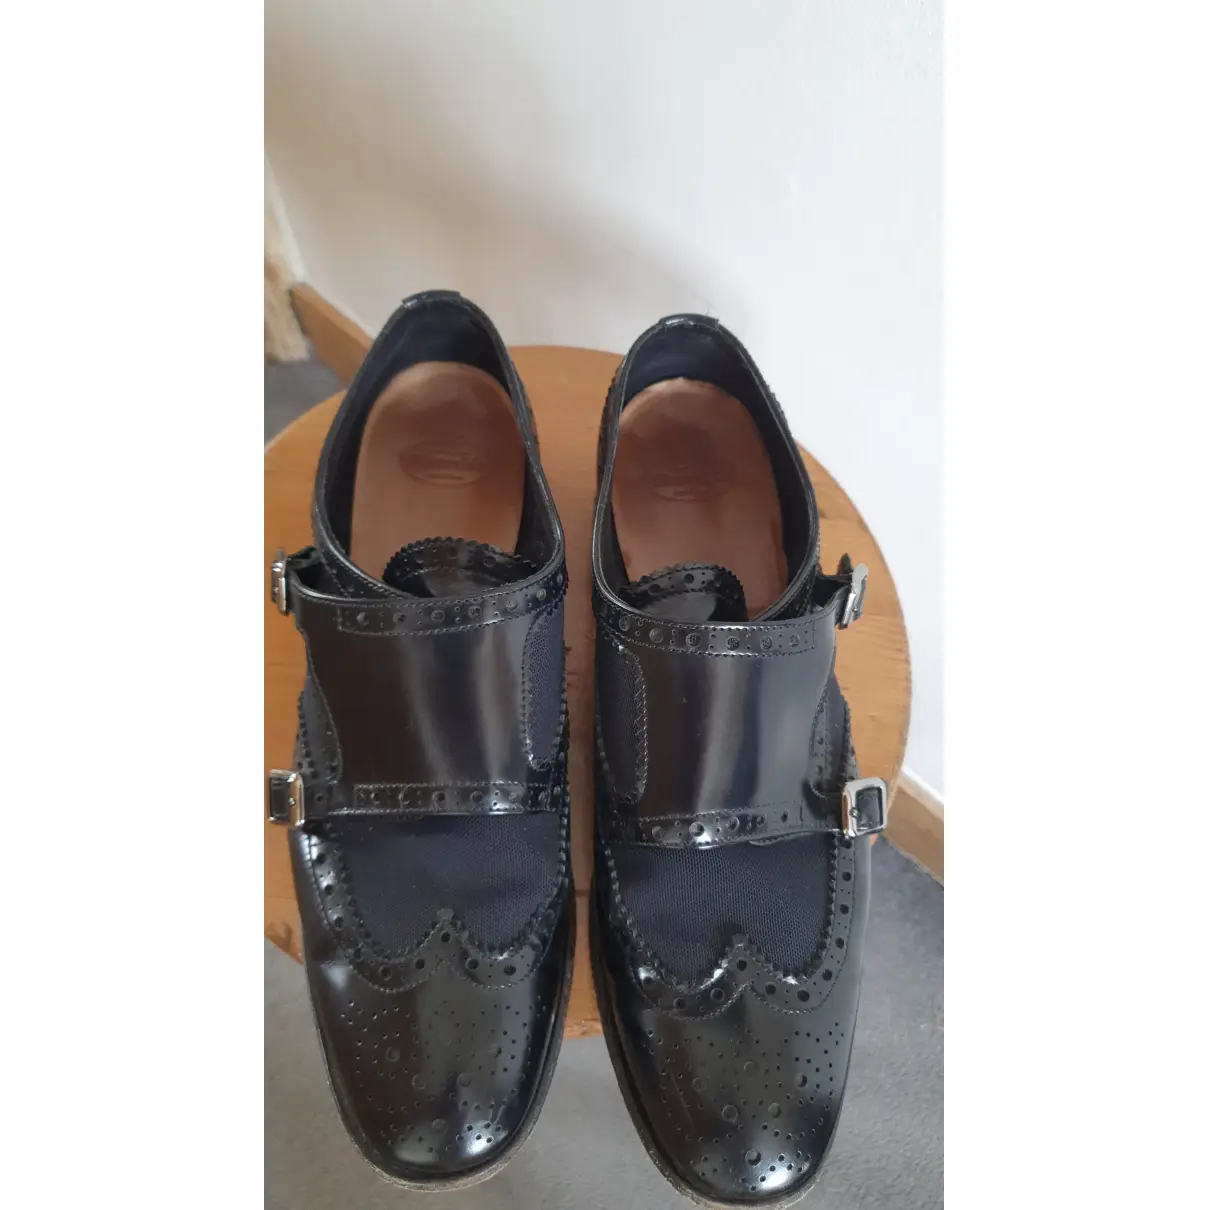 Buy Church's Patent leather flats online